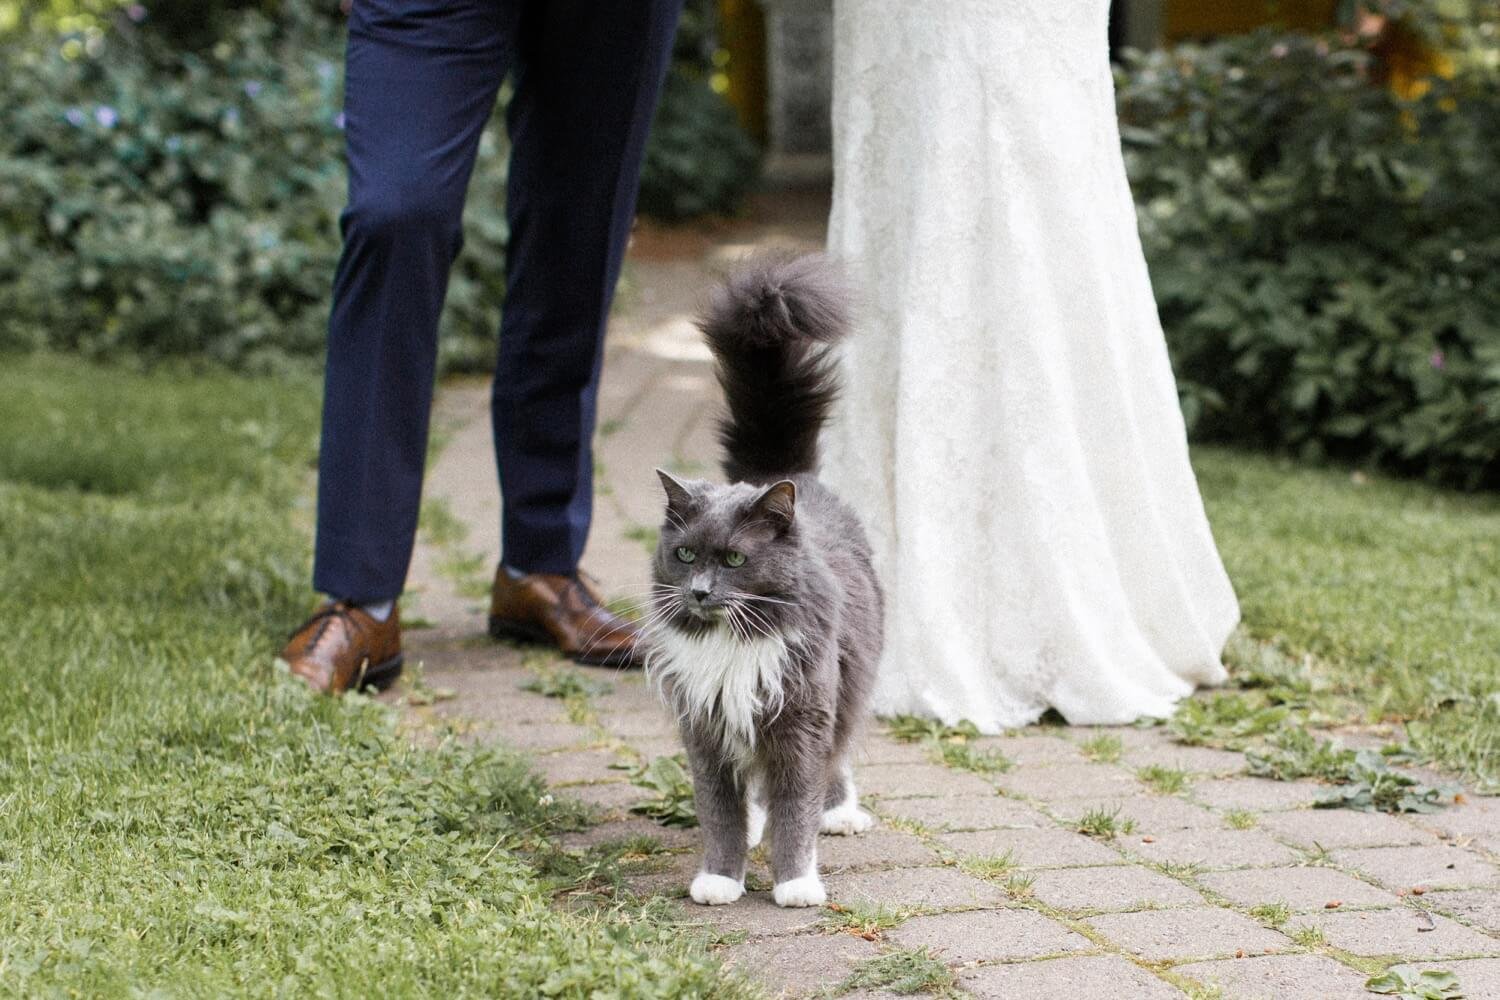 035_Mount Hood Organic Farms Wedding-White and gray cat stands between bride and groom.jpg